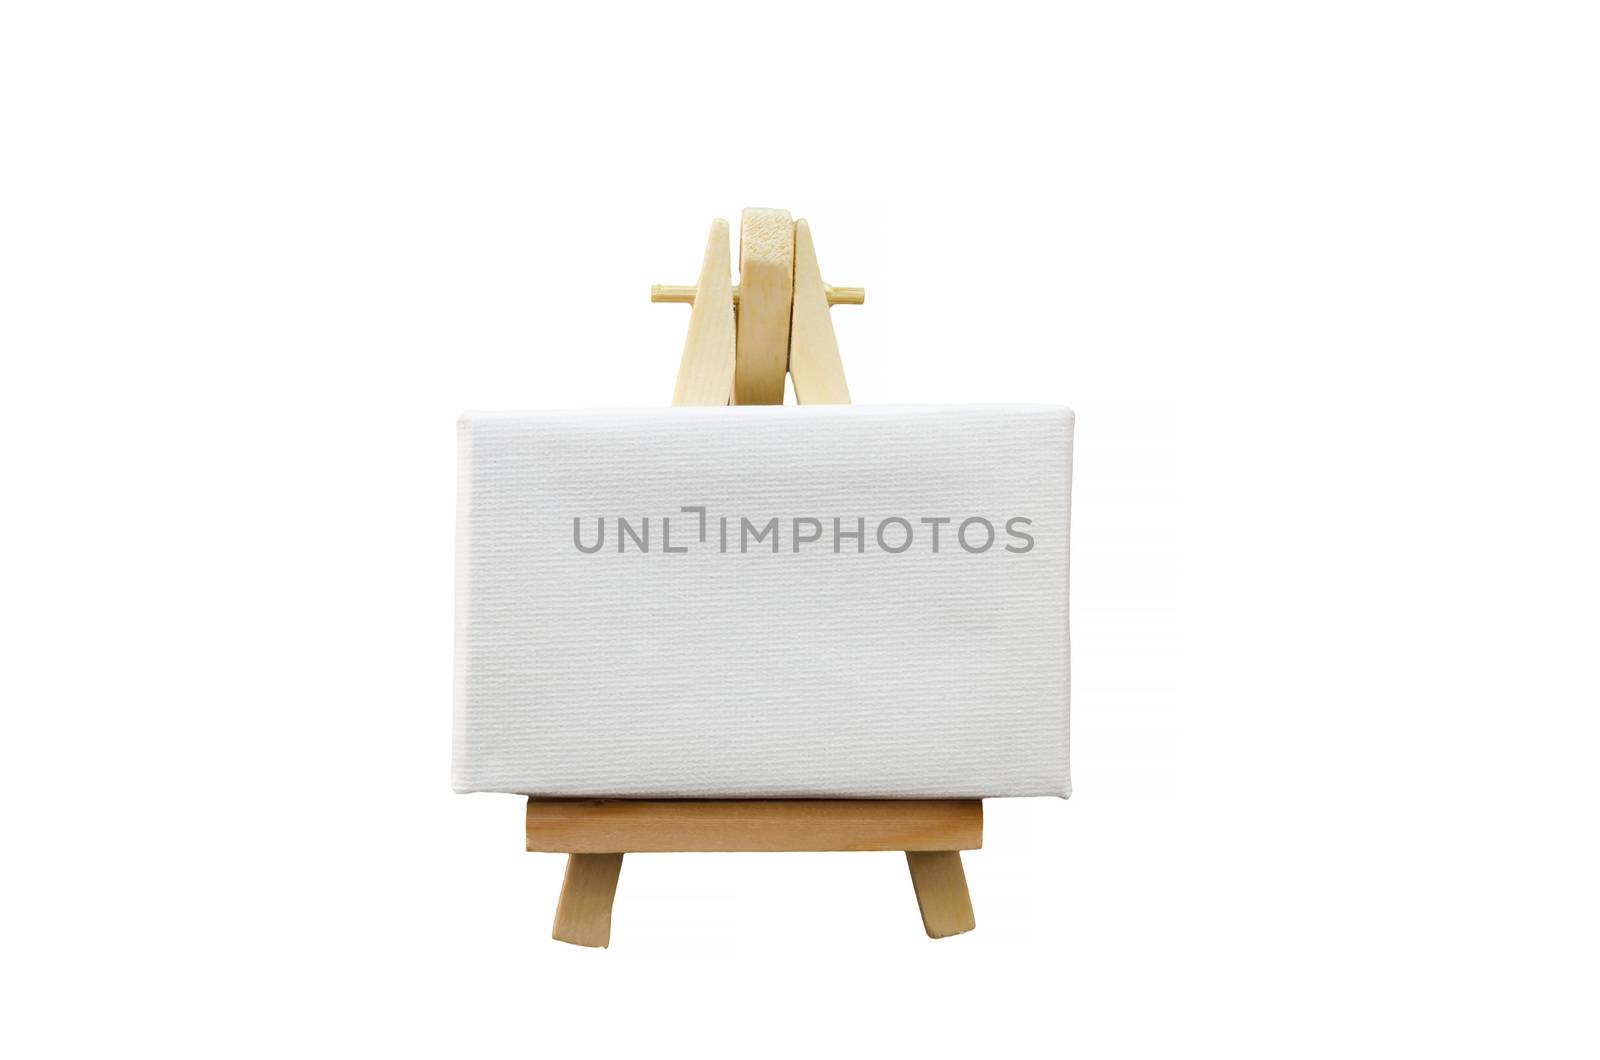 Miniature artist easel, isolated against a white background.